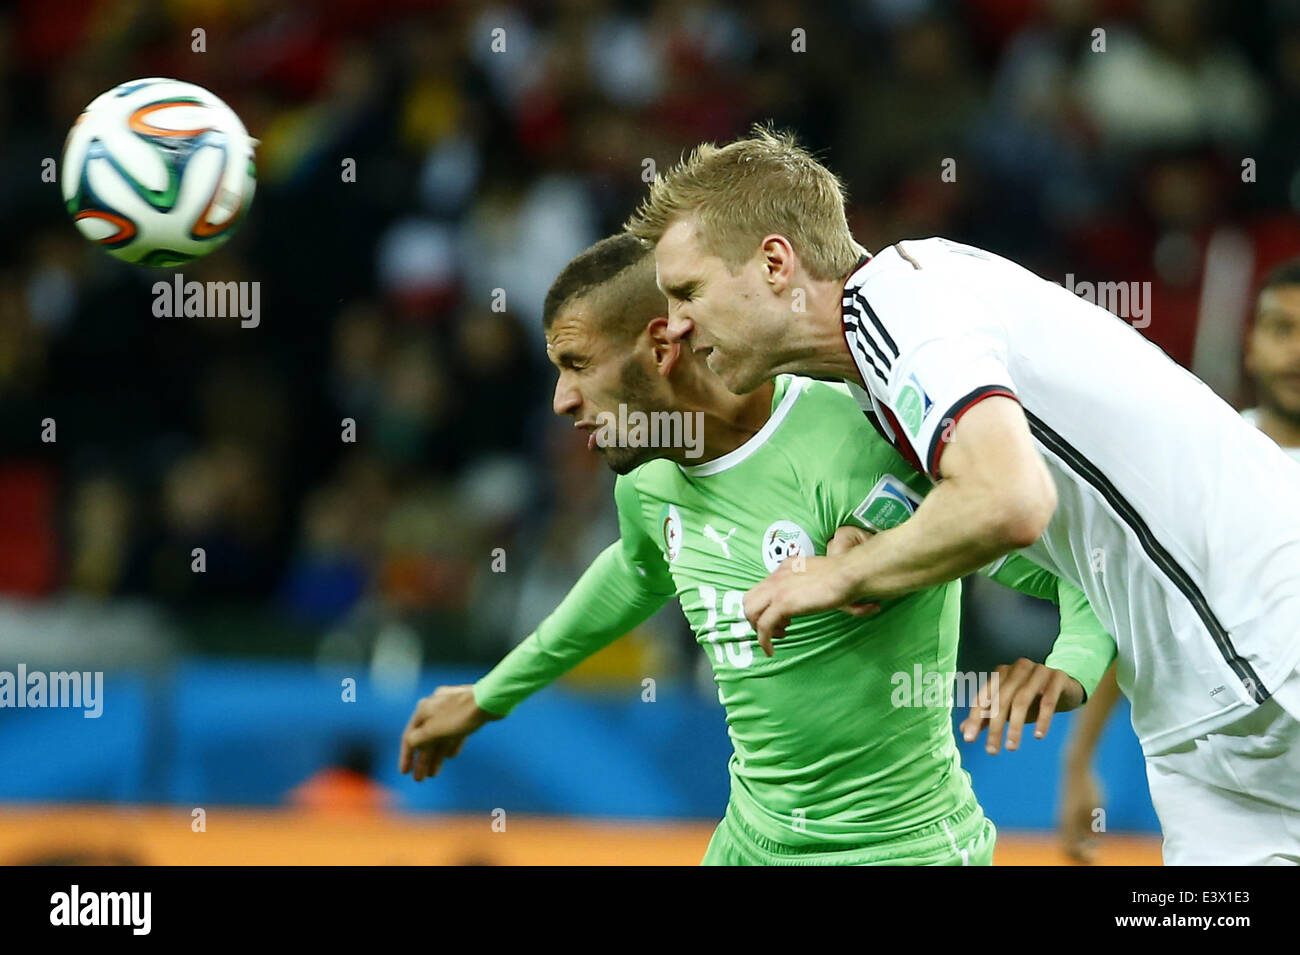 Porto Alegre, Brazil. 30th June, 2014. Germany's Per Mertesacker vies with Algeria's Islam Slimani during a Round of 16 match between Germany and Algeria of 2014 FIFA World Cup at the Estadio Beira-Rio Stadium in Porto Alegre, Brazil, on June 30, 2014. Credit:  Chen Jianli/Xinhua/Alamy Live News Stock Photo